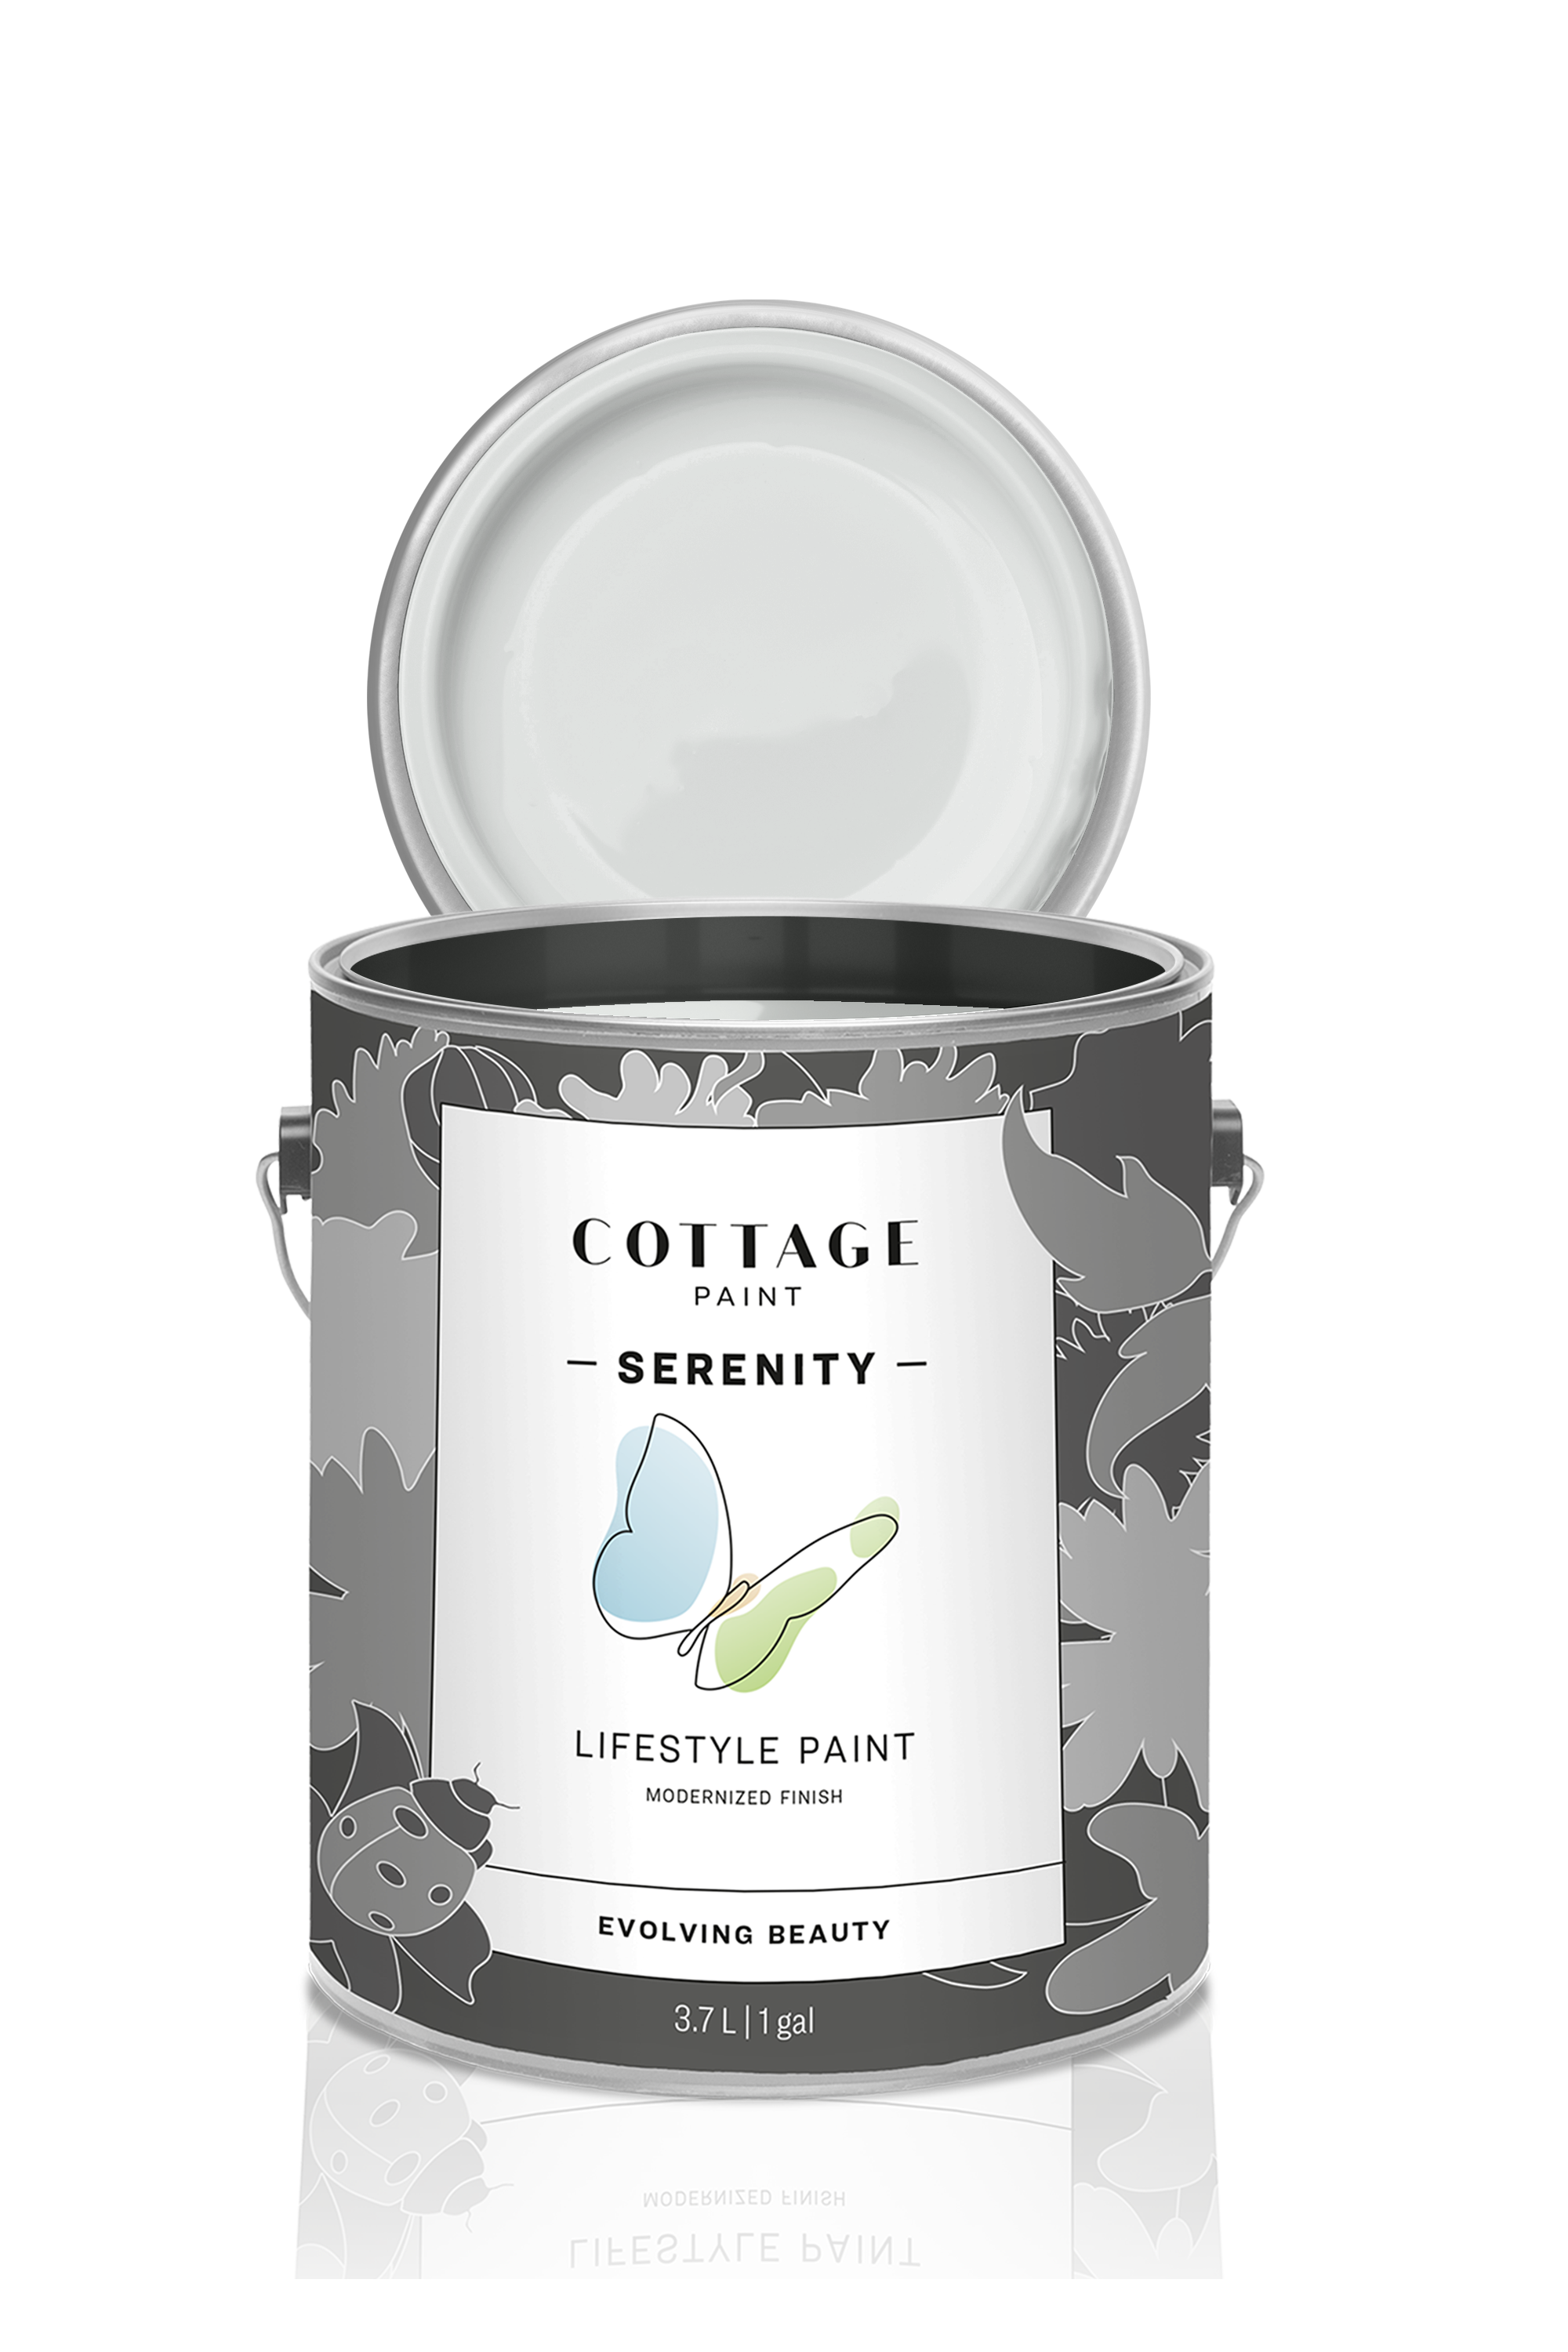 Whites and Cream tones - Serenity silk Cottage Paint